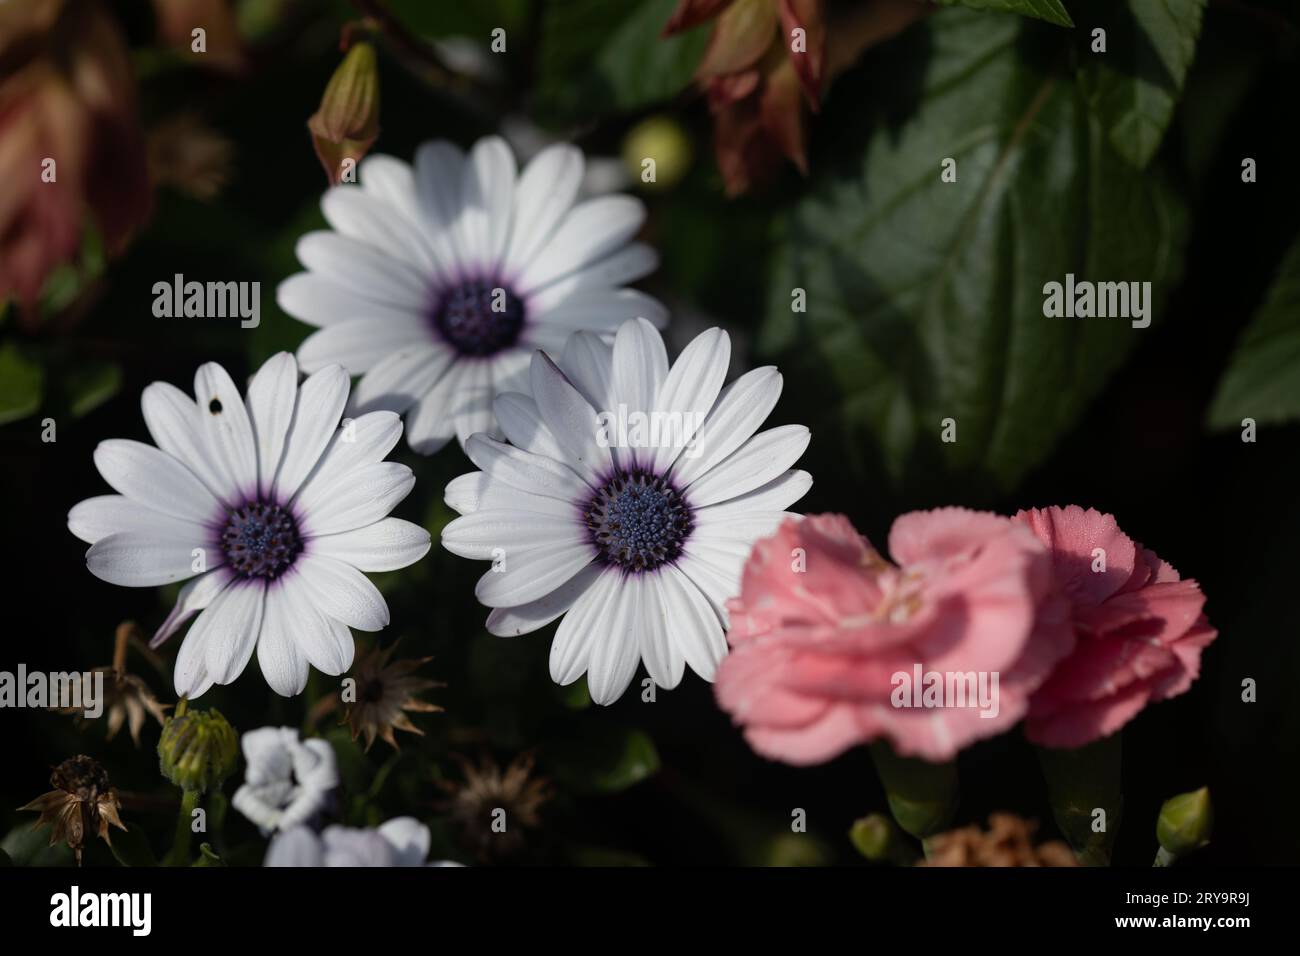 White daisy flowers and pink camellias in garden Stock Photo